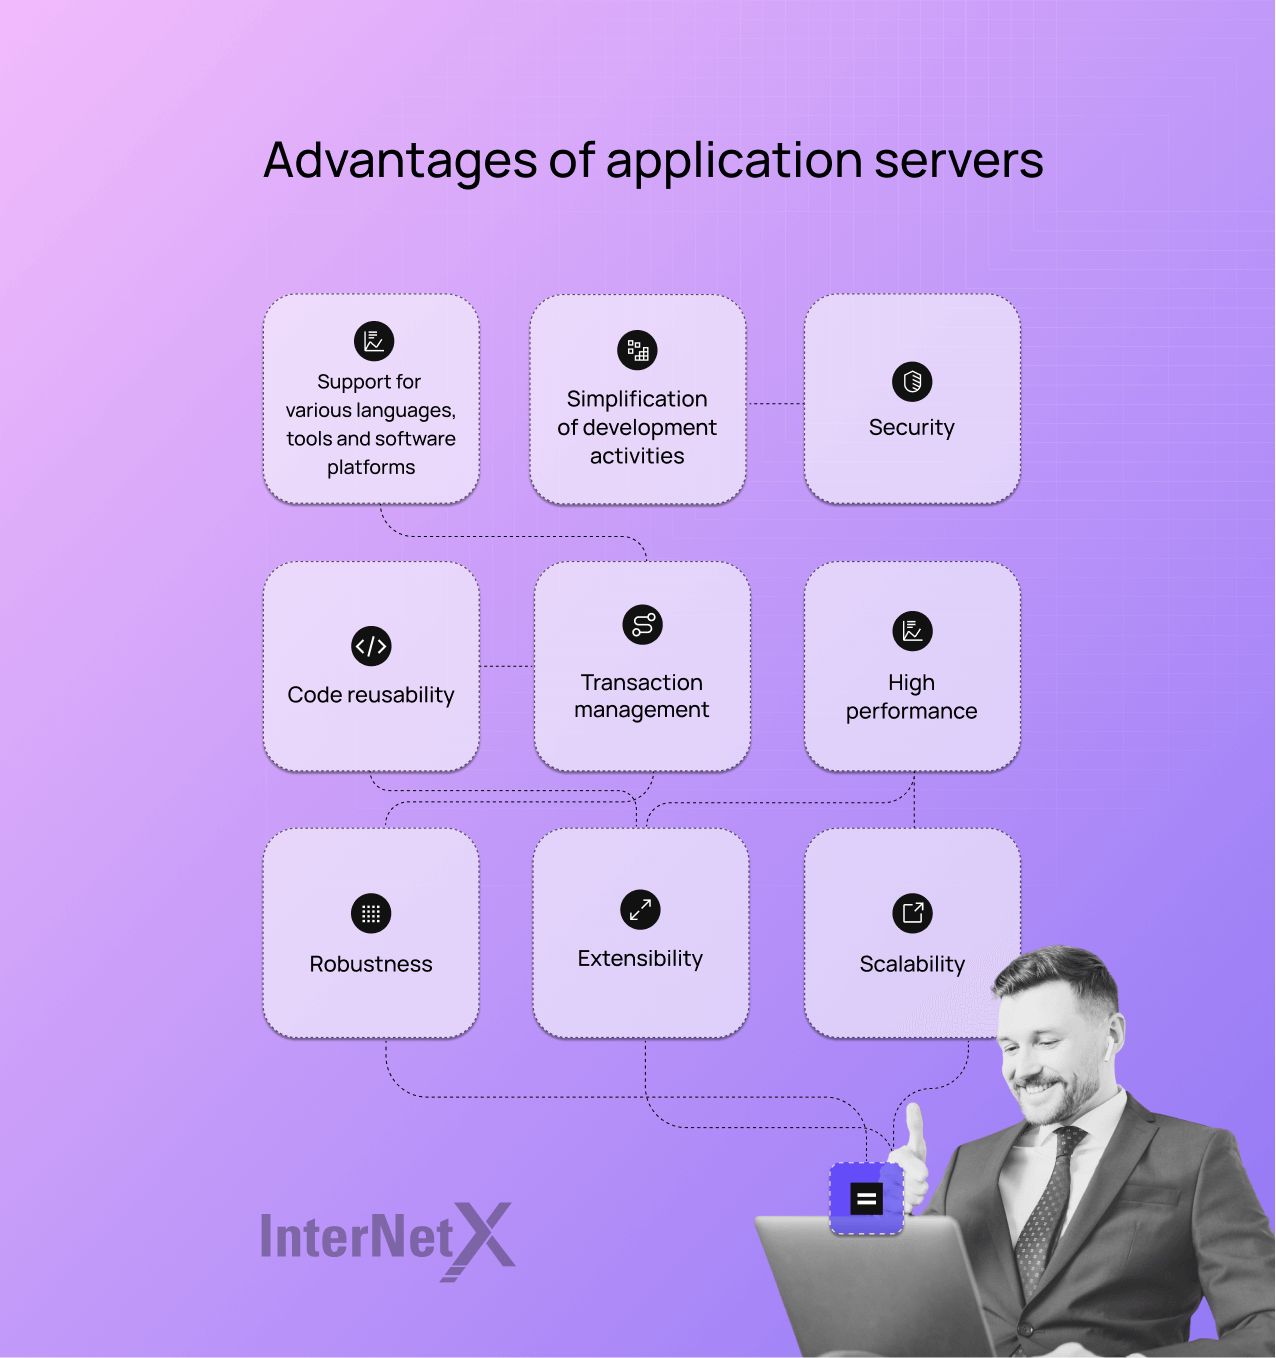 Application servers offer numerous advantages contributing to web applications' efficient functioning and management.